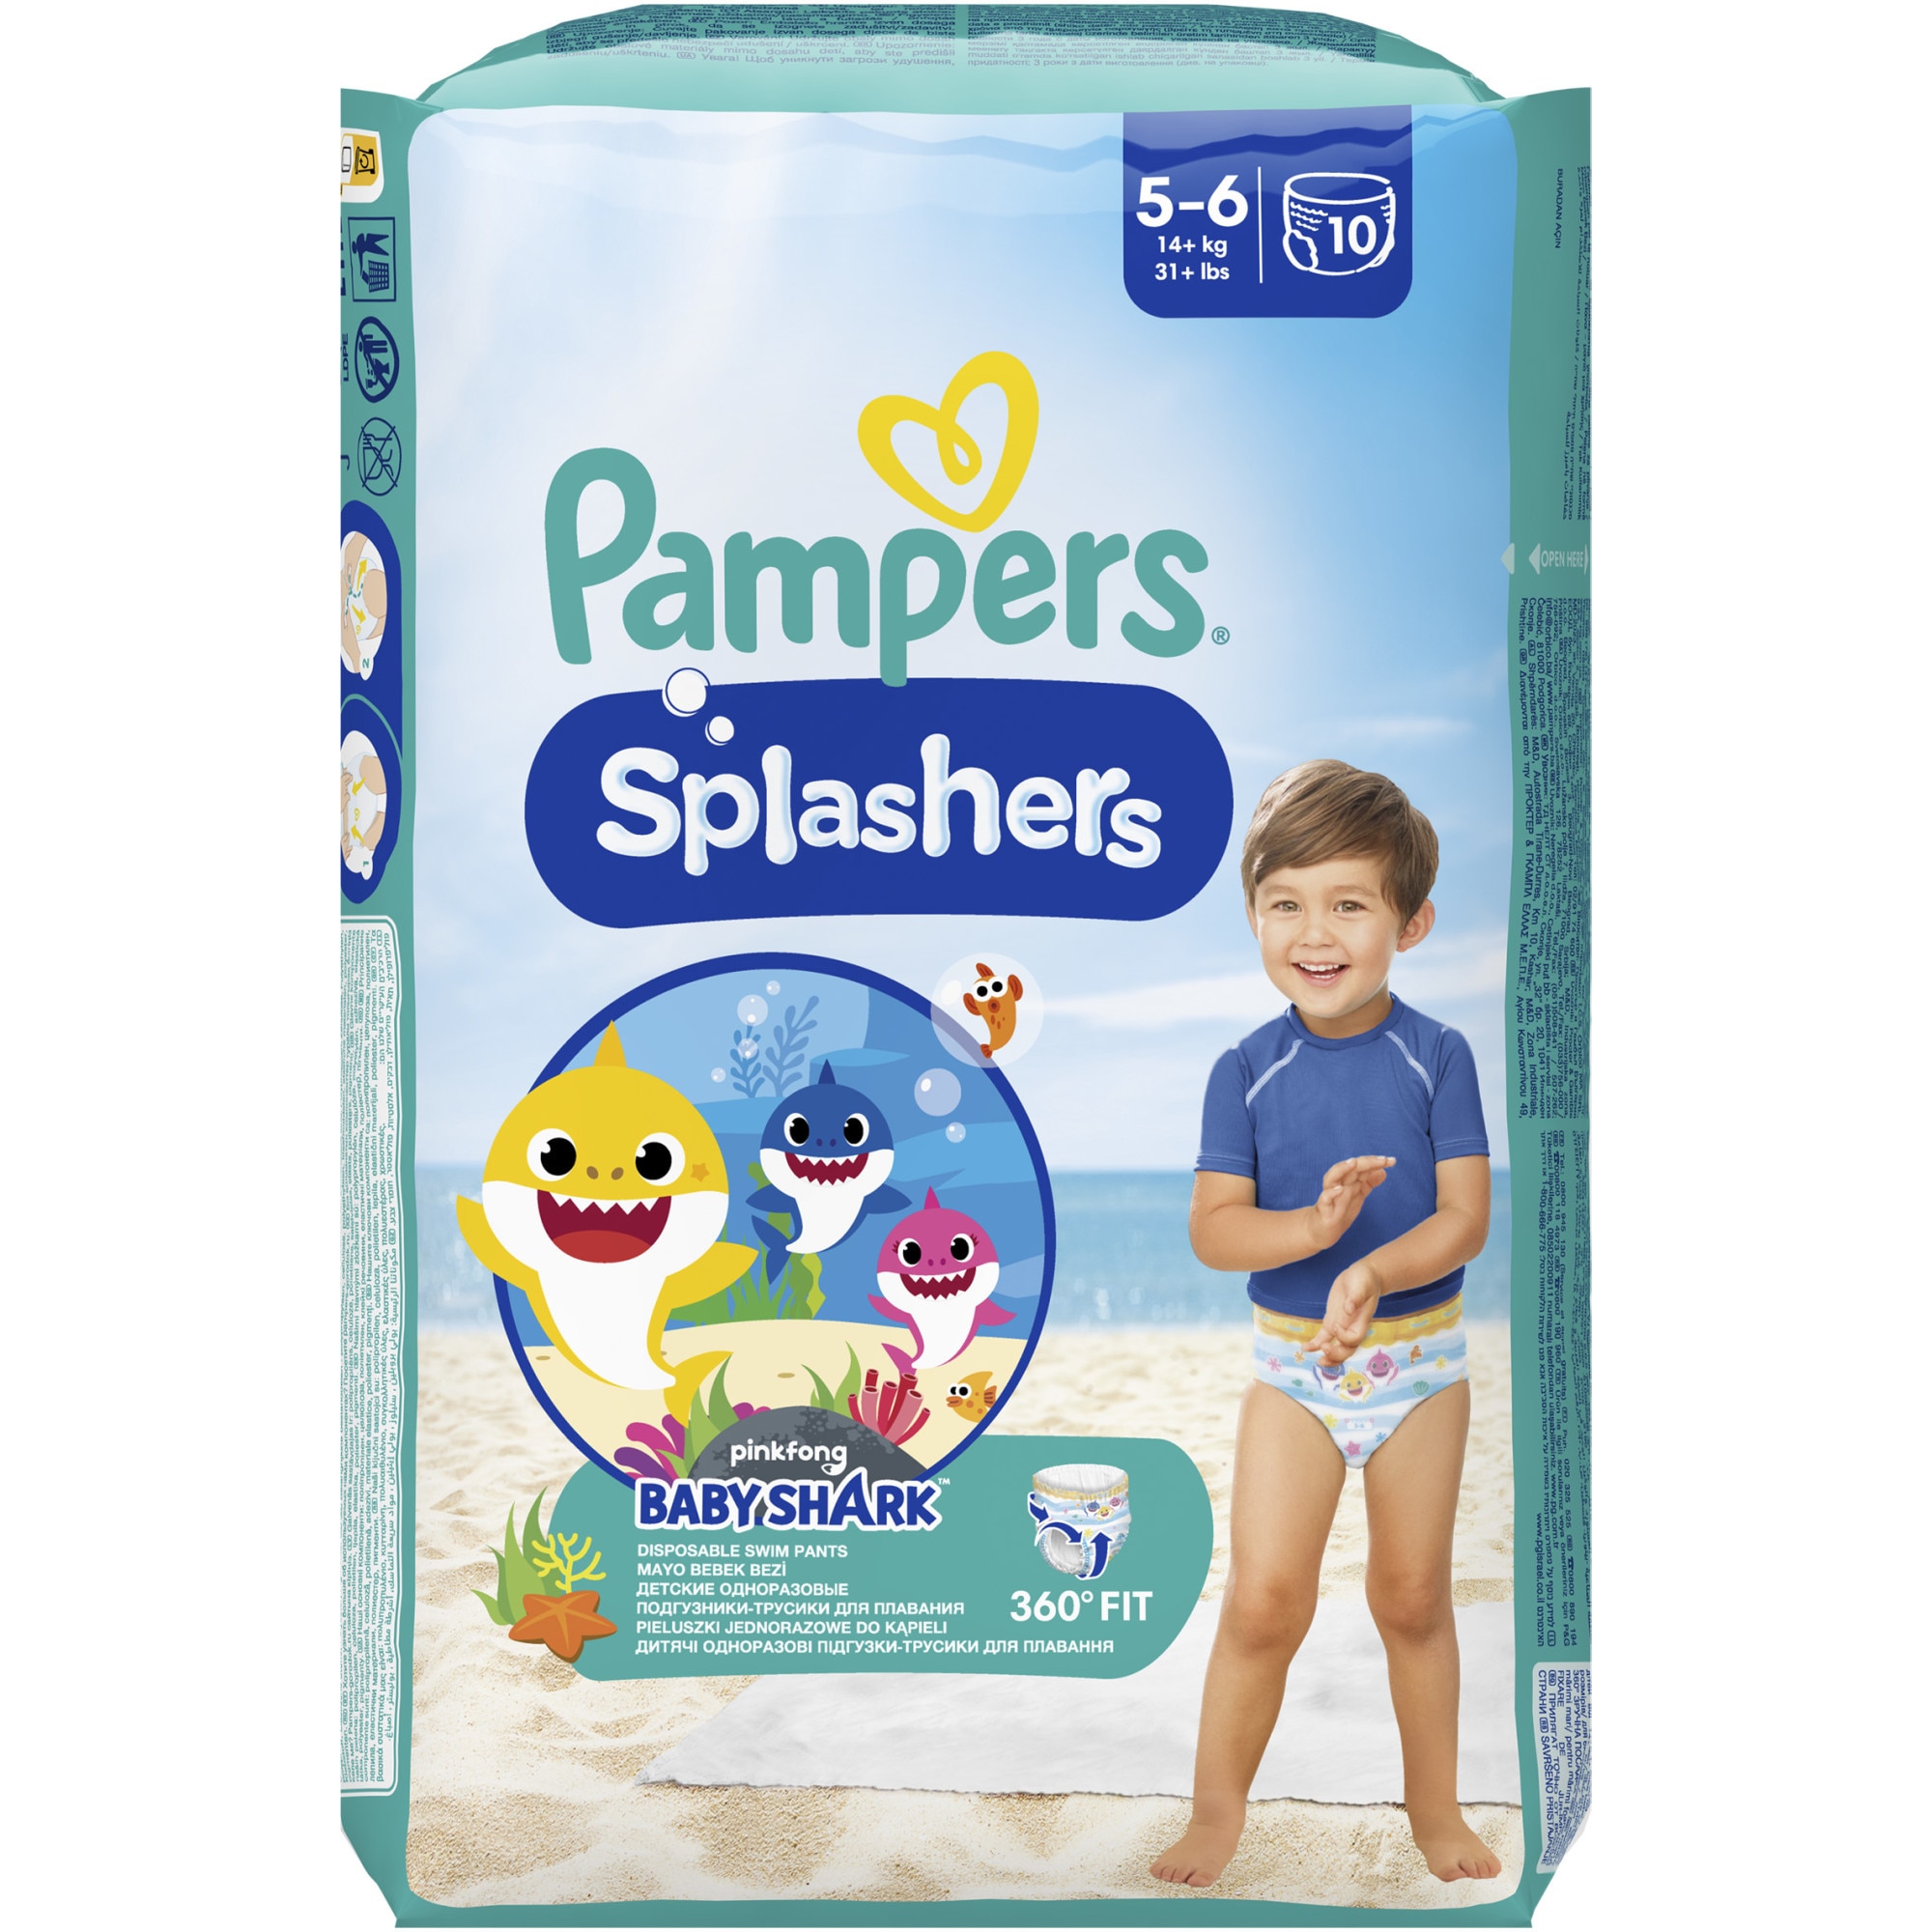 Pampers Splashers Baby Shark Edition Size 3-4, 6kg-11kg, 12 Disposable Swim  Nappy Pants